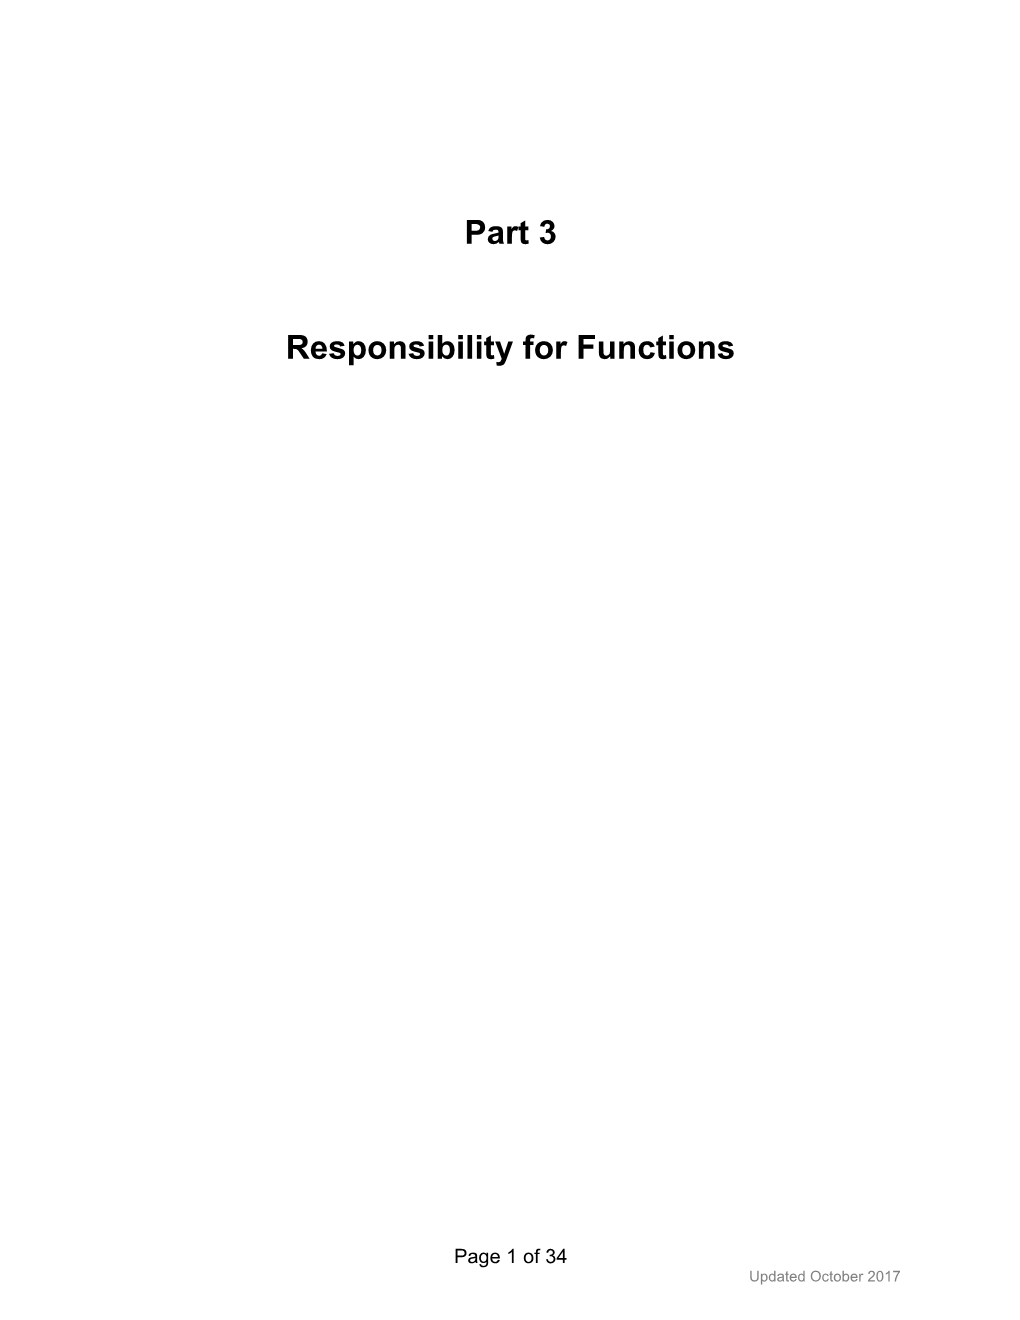 Responsibility for Functions